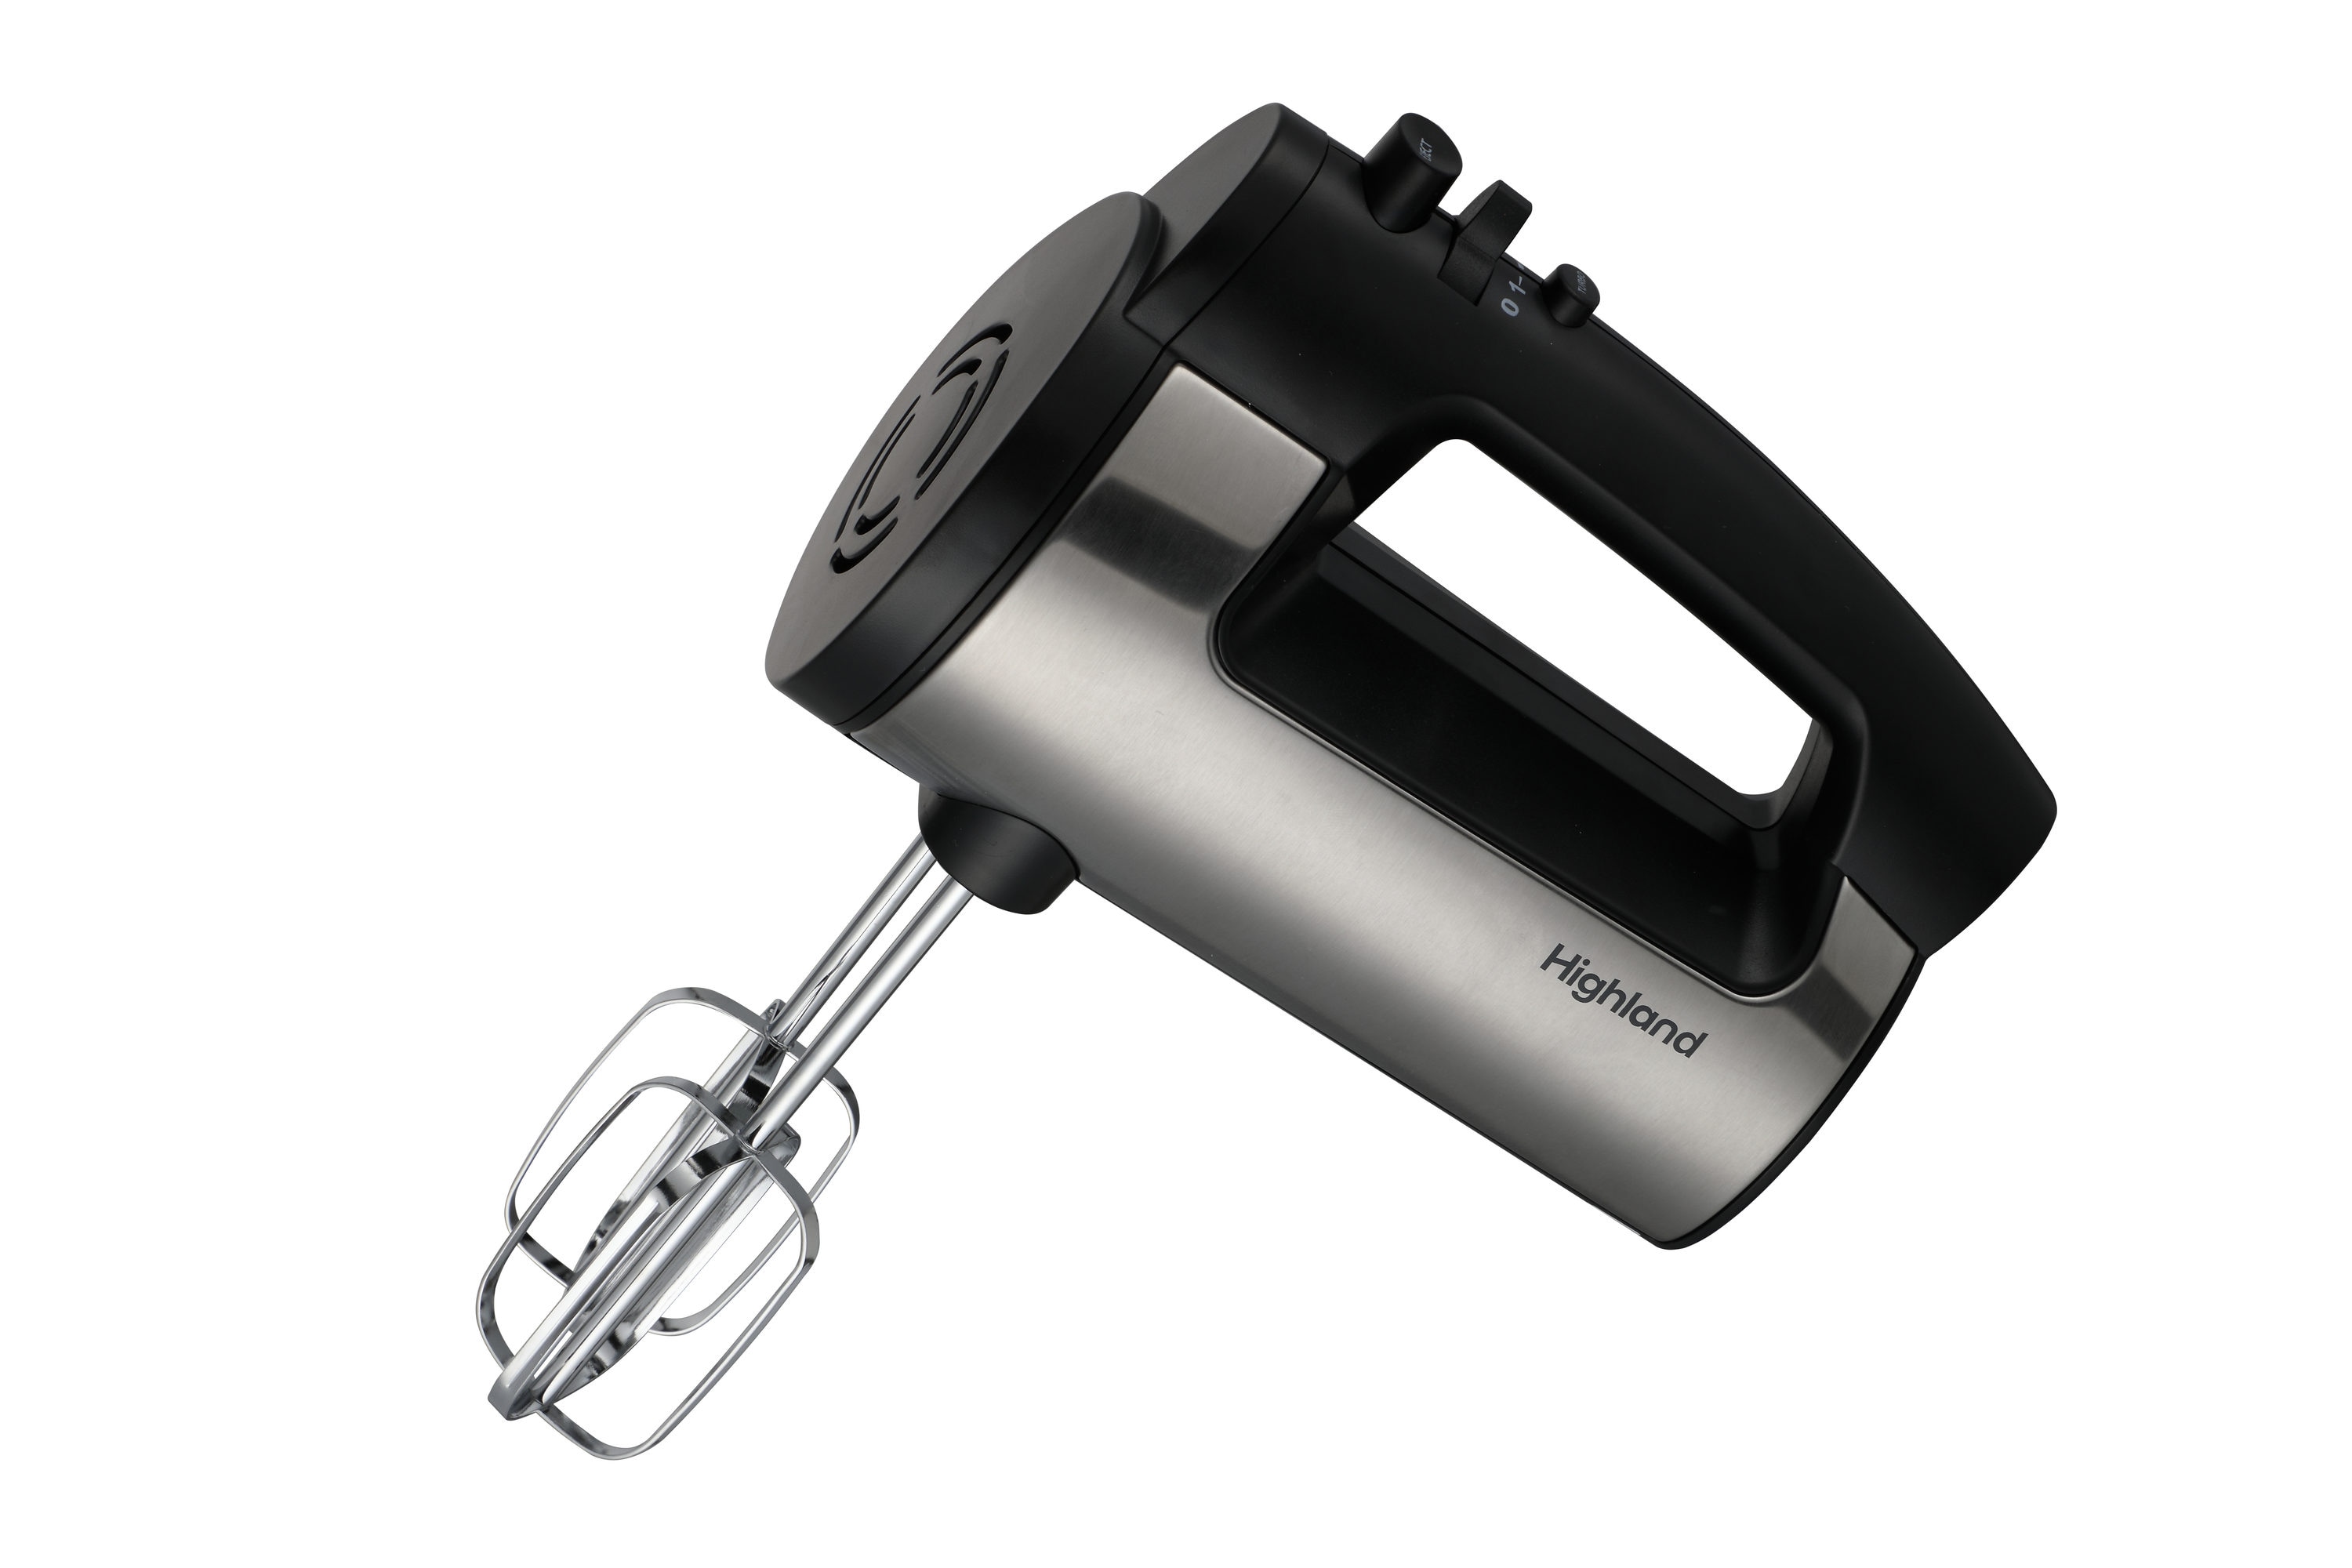 Highland 63-in Cord 2-Speed Black and Stainless Steel Hand Mixer